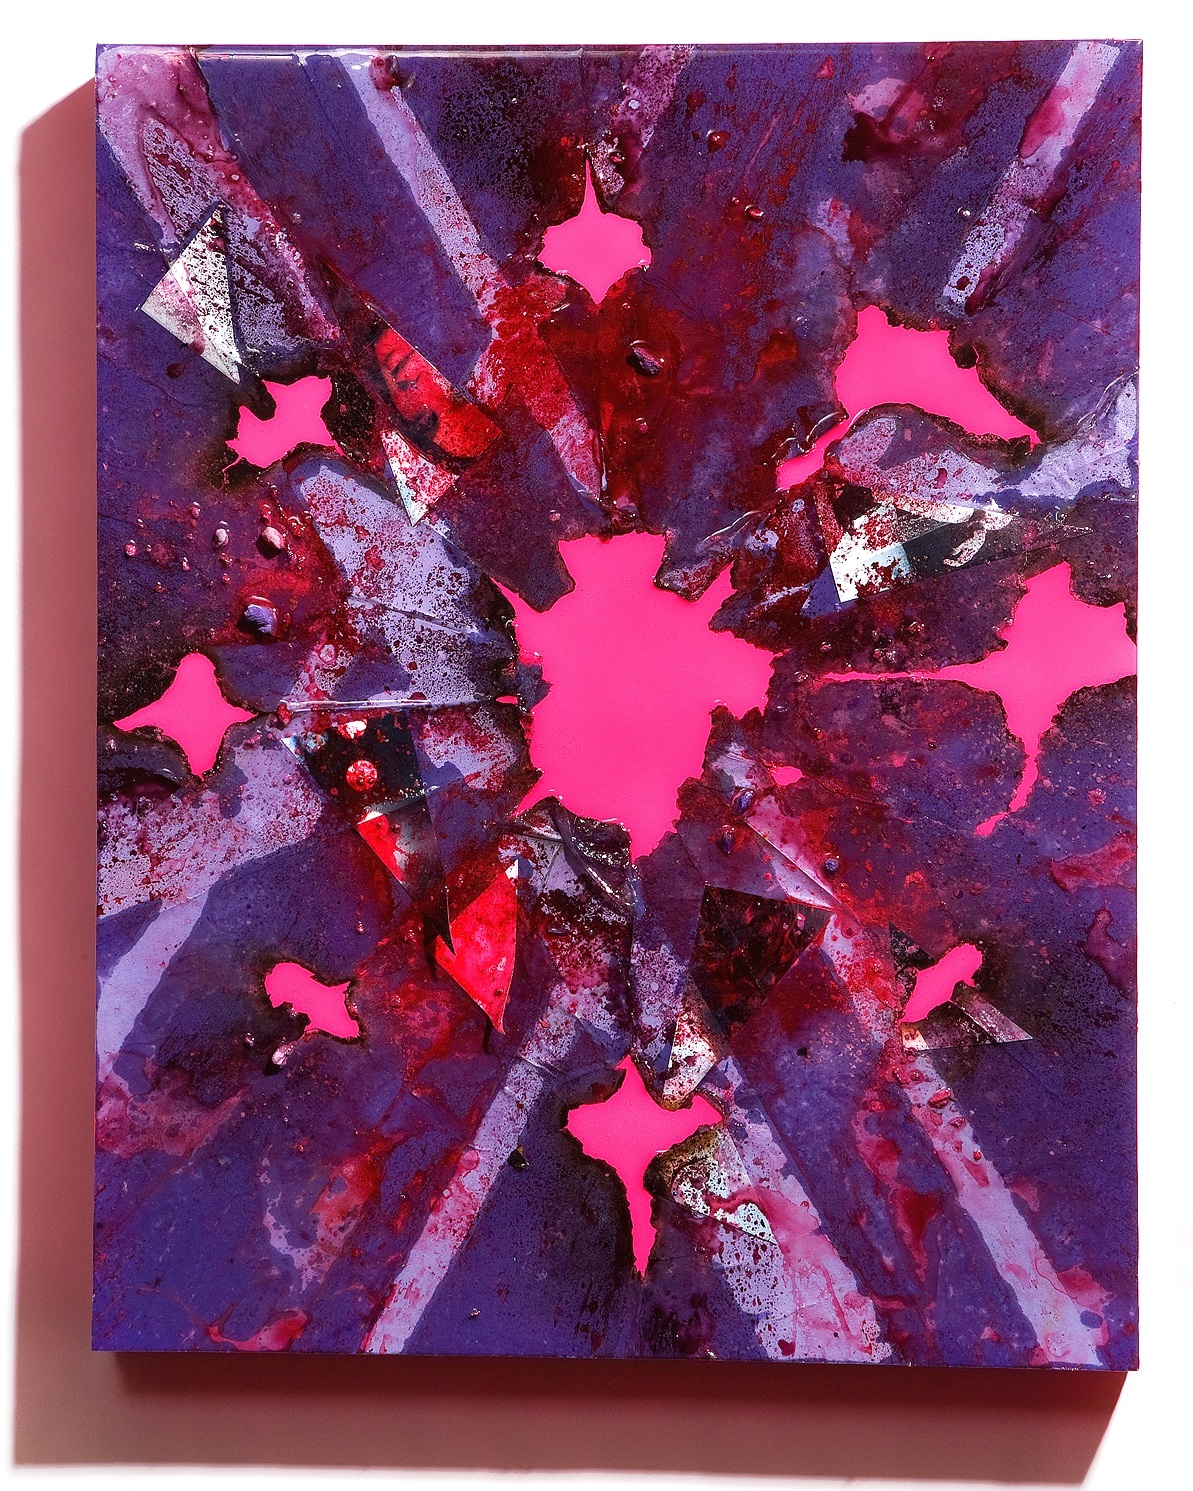 SERIE I, Untitled (violet/day-glo pink), photographs, photo background paper, chalk, spray paint, packing tape, powder drink, glue, epoxy resin on wood panel, 16"x20"x2", 2019